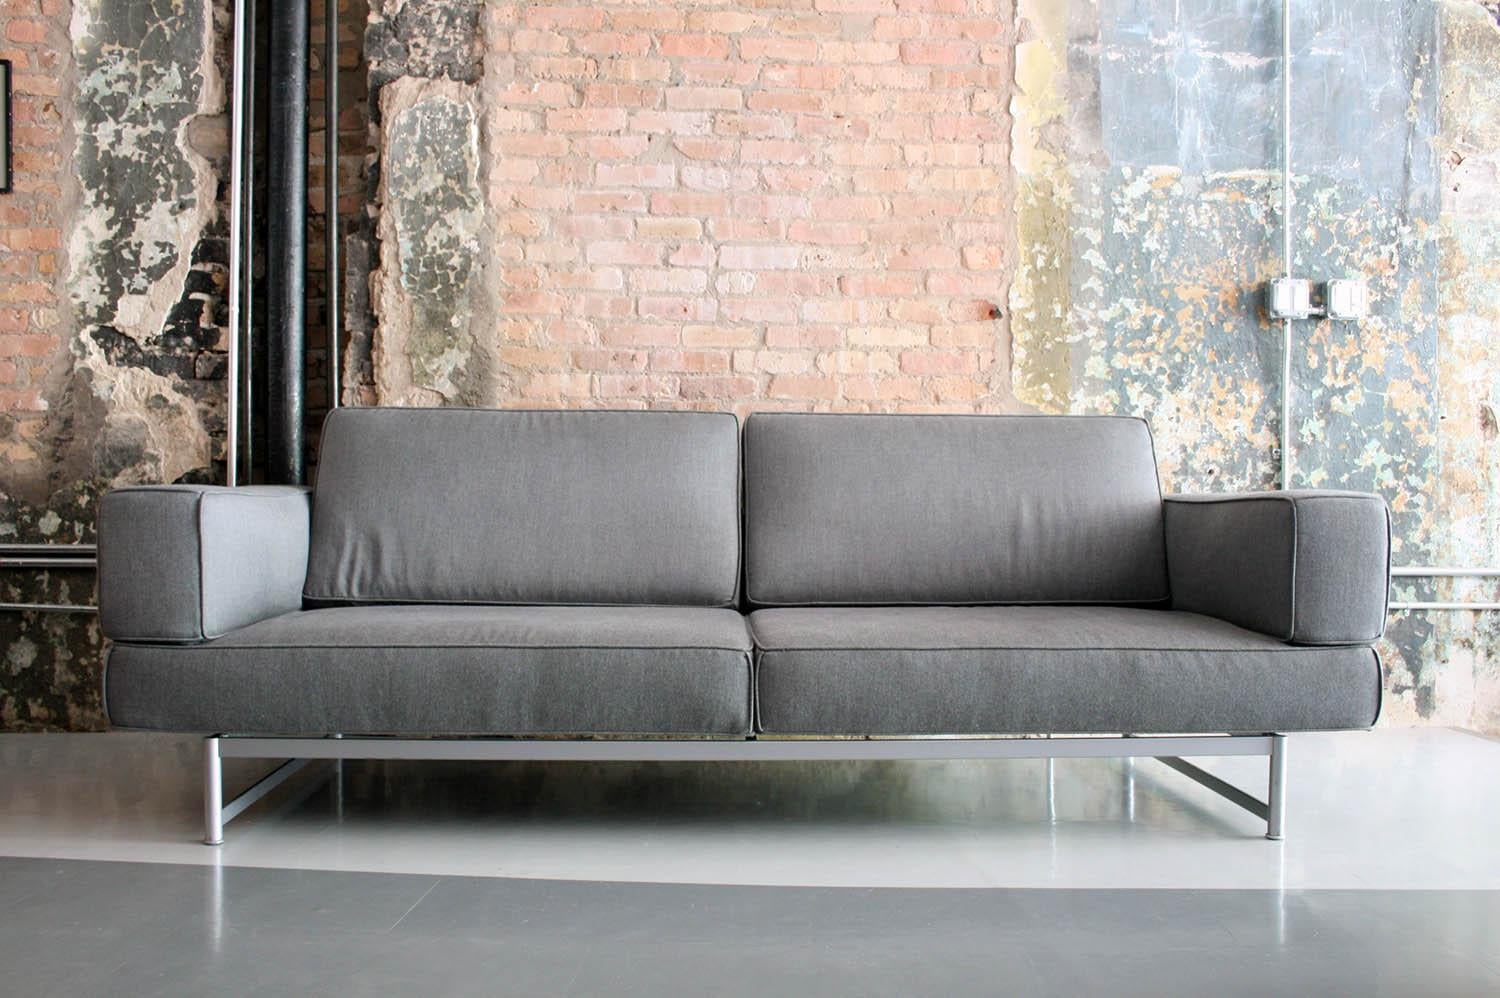 Piero Lissoni Reef sofa for Cassina Italy in grey wool felt upholstery. The back rests can be lifted up to adjust for head support. Excellent overall condition and very comfortable.